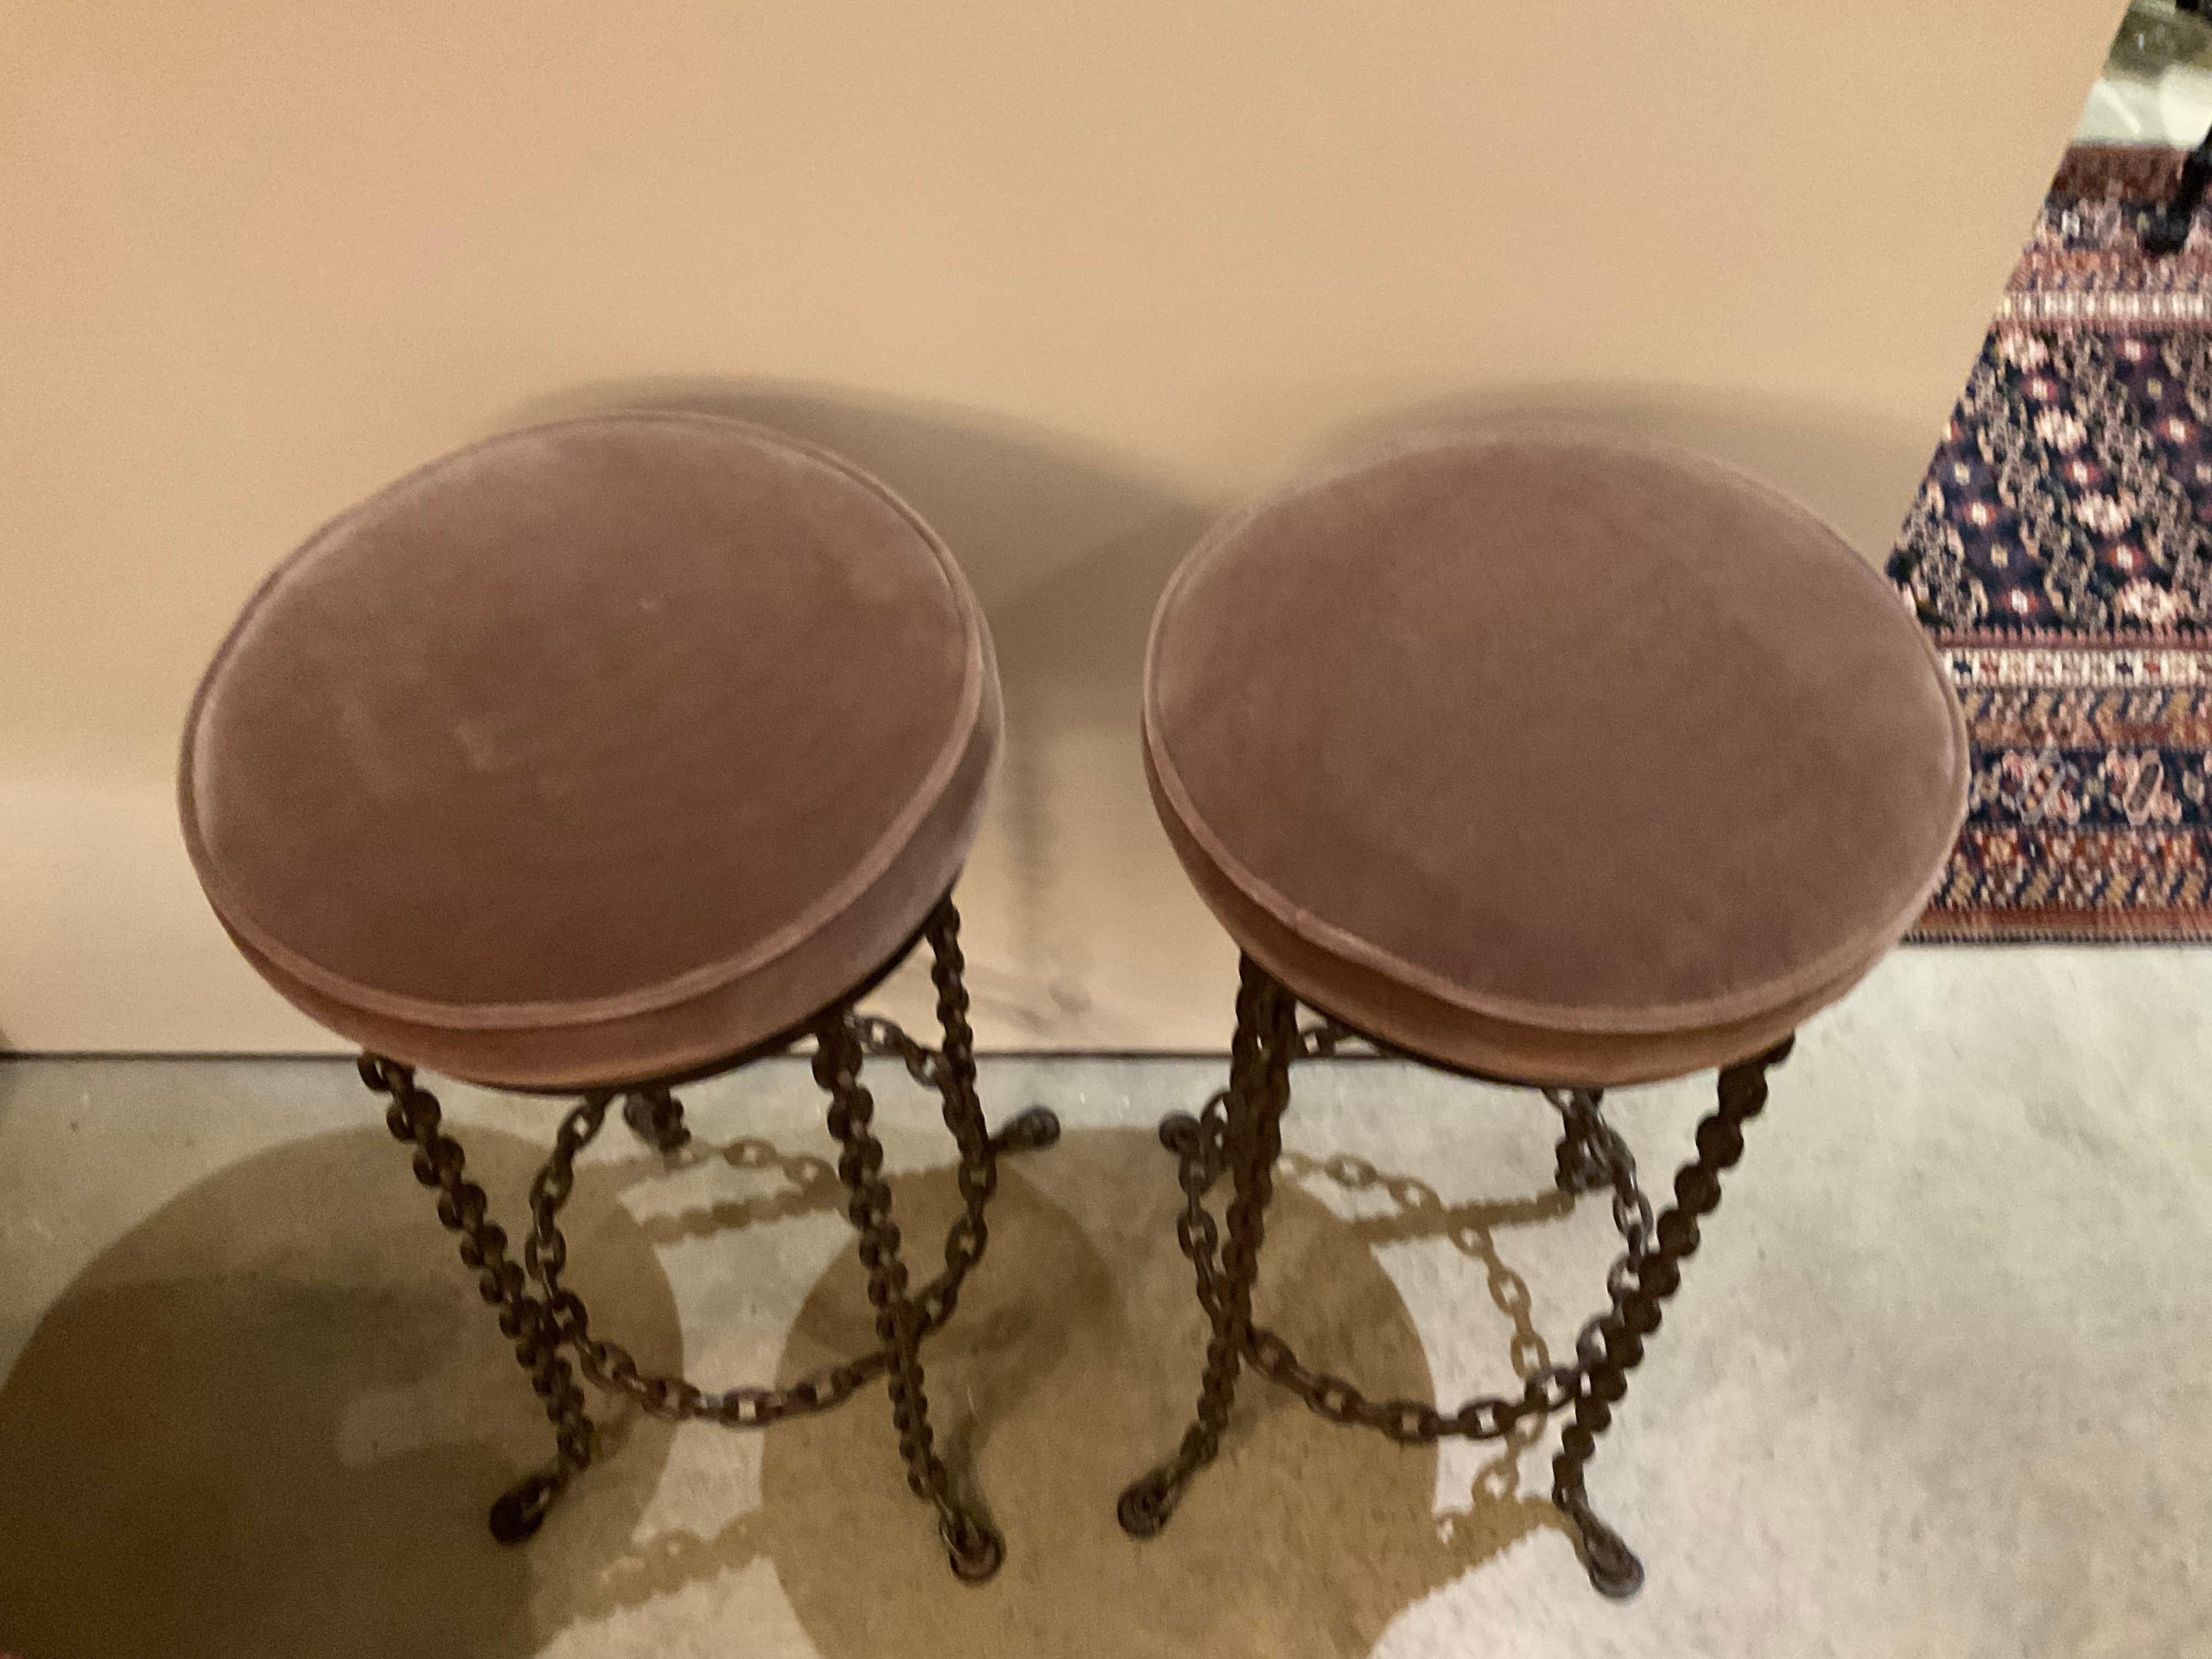 Pair of unique chain link swivel barstools in a gun metal finish with mohair seats and link stretchers. Large comfortable seat cushions easily recovered or ready for use.